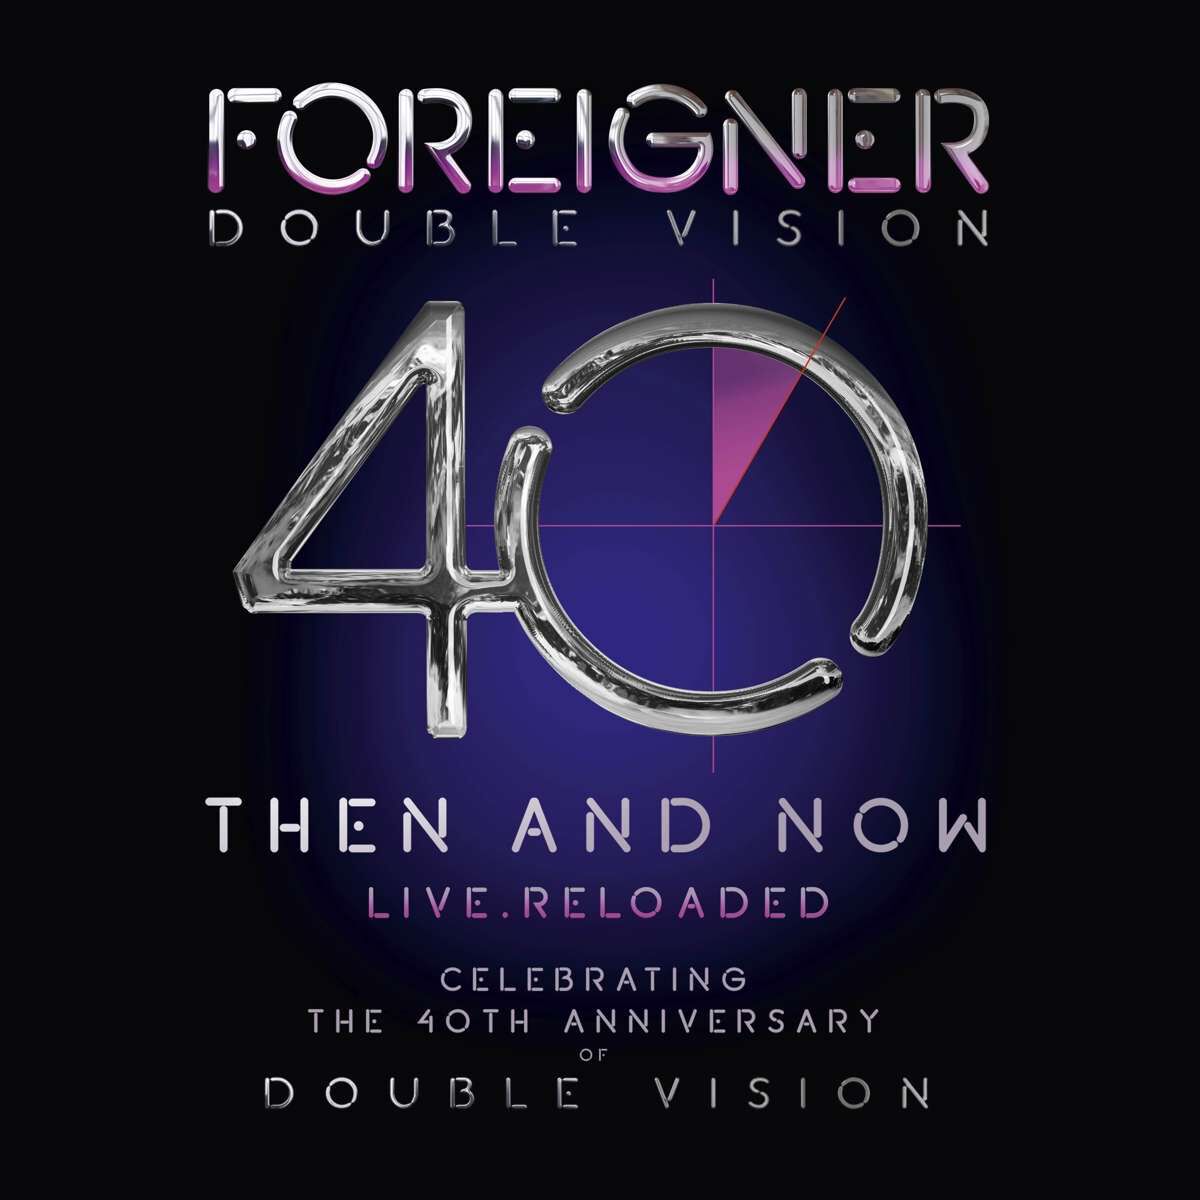 Foreigner Double vision: Then and now CD multicolor